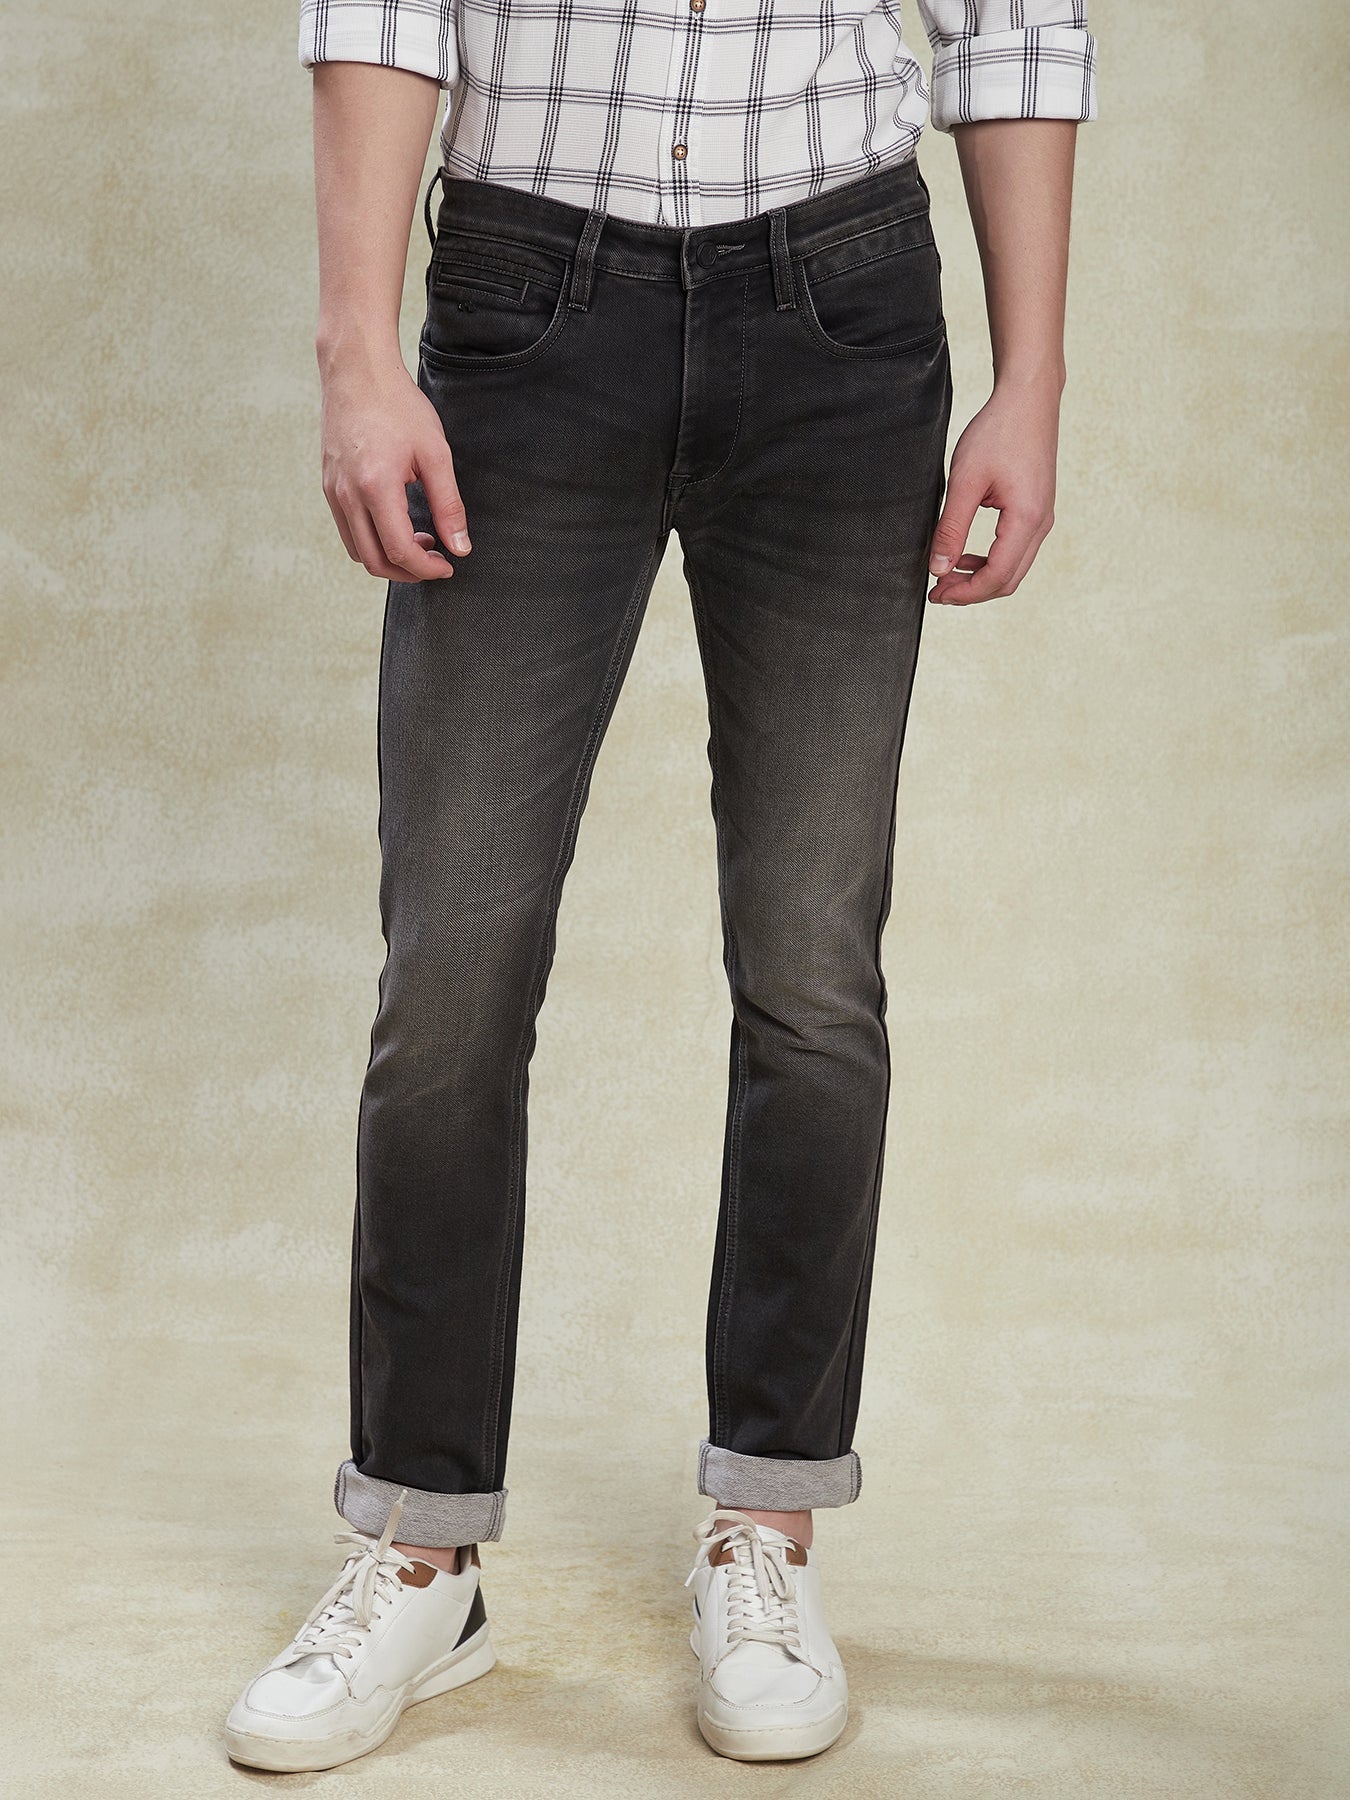 cotton-stretch-dark-grey-narrow-fit-flat-front-casual-mens-jeans